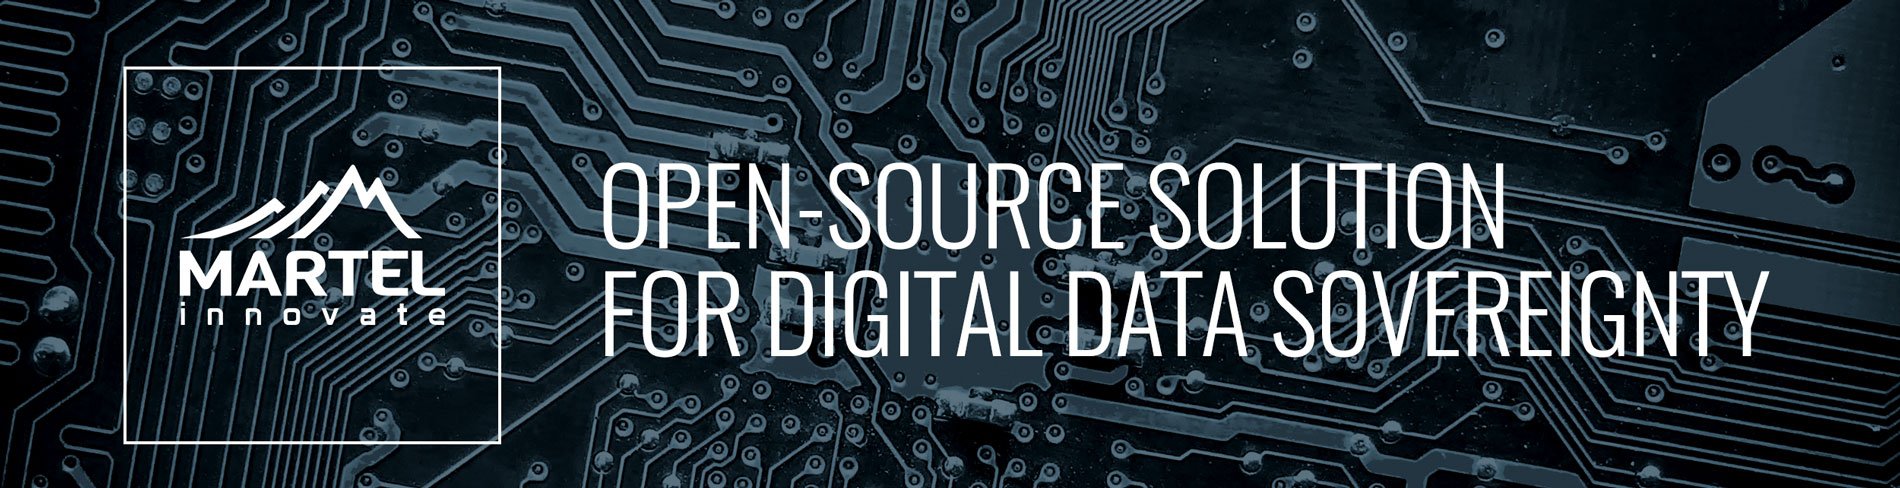 Open-source solution for digital data sovereignty